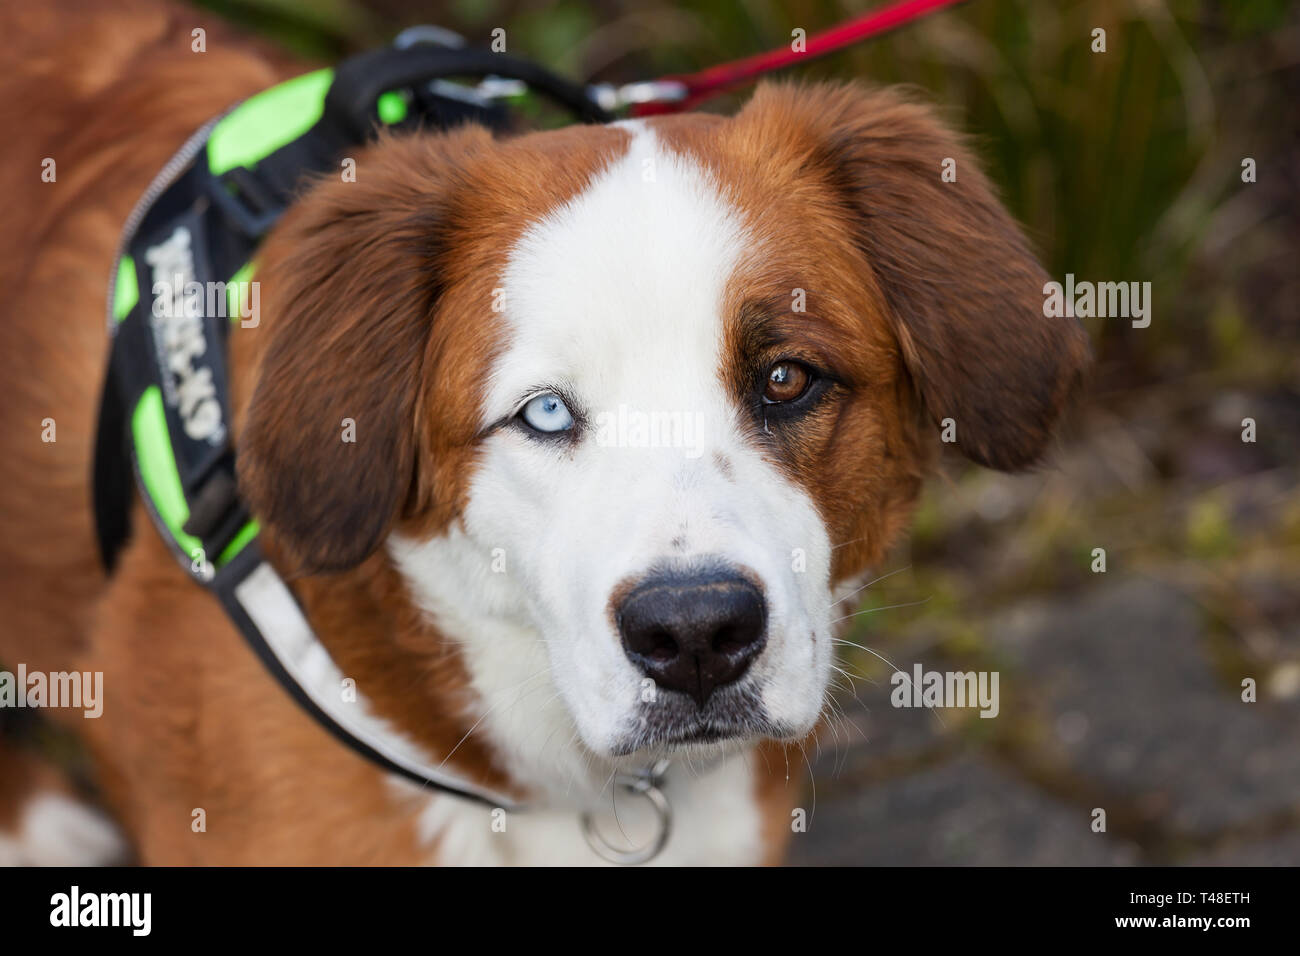 Dog with two different colored eyes Stock Photo